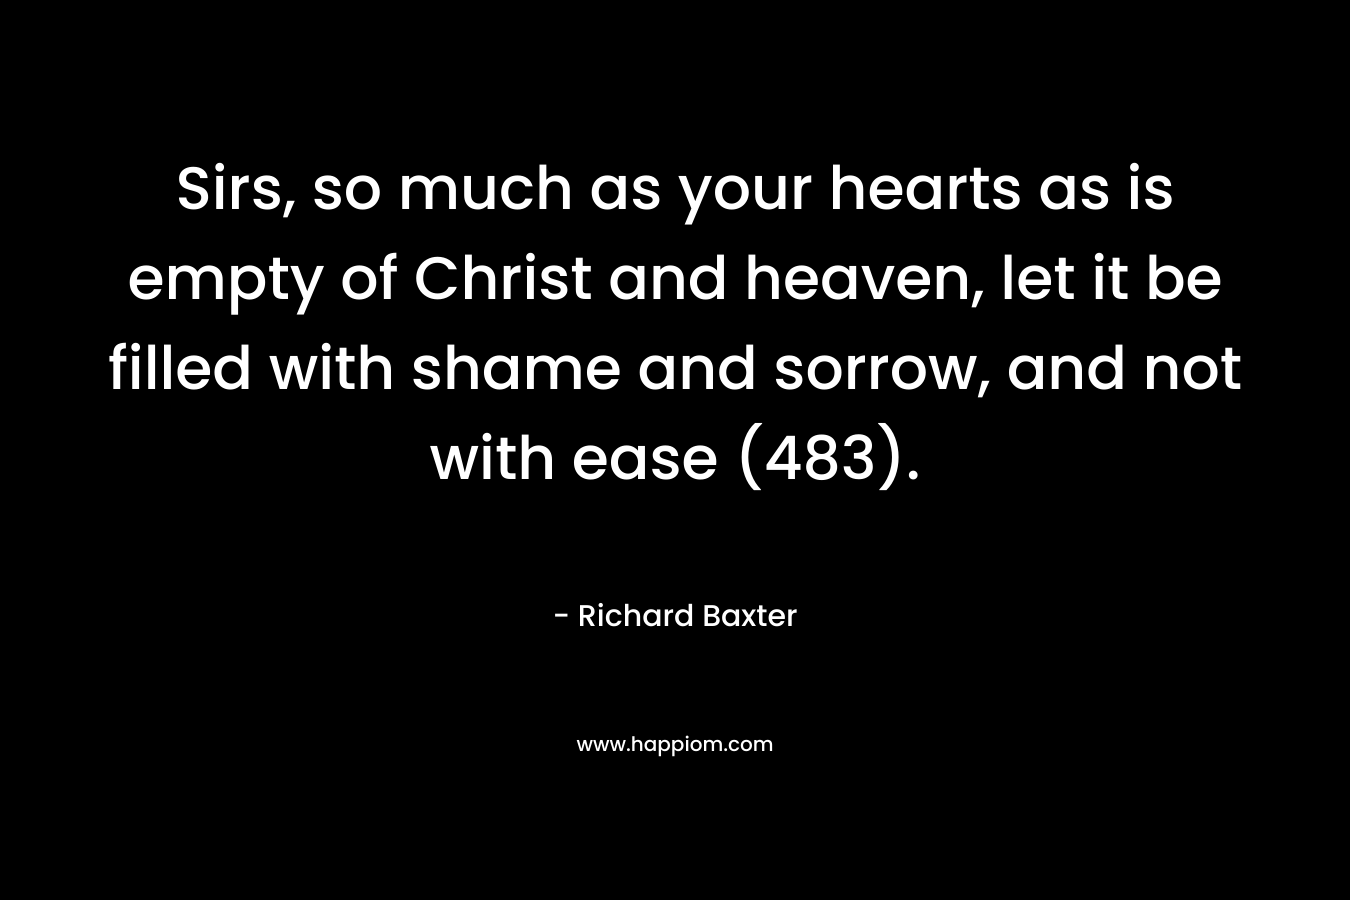 Sirs, so much as your hearts as is empty of Christ and heaven, let it be filled with shame and sorrow, and not with ease (483).